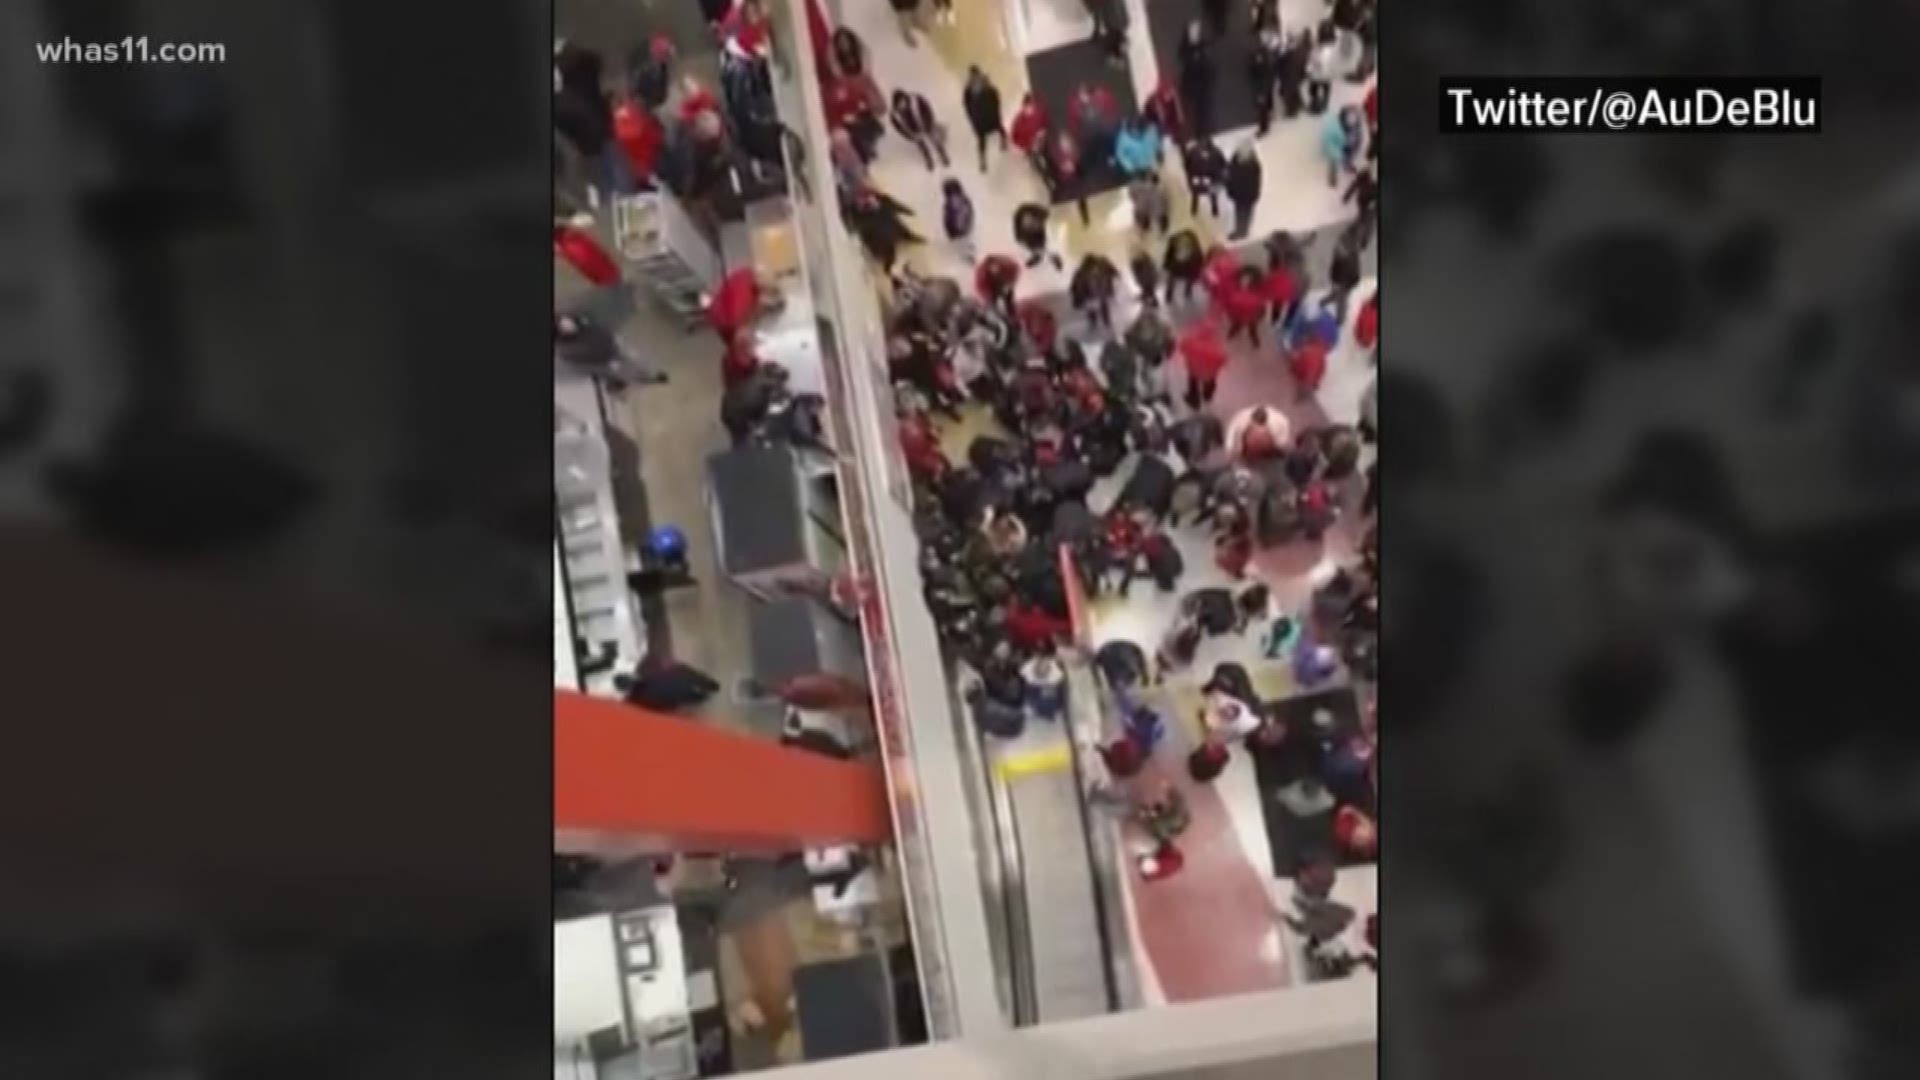 A celebratory mood turning into terrifying moments for Cardinal fans at the KFC Yum! Center when an escalator malfunctioned and injured several people.